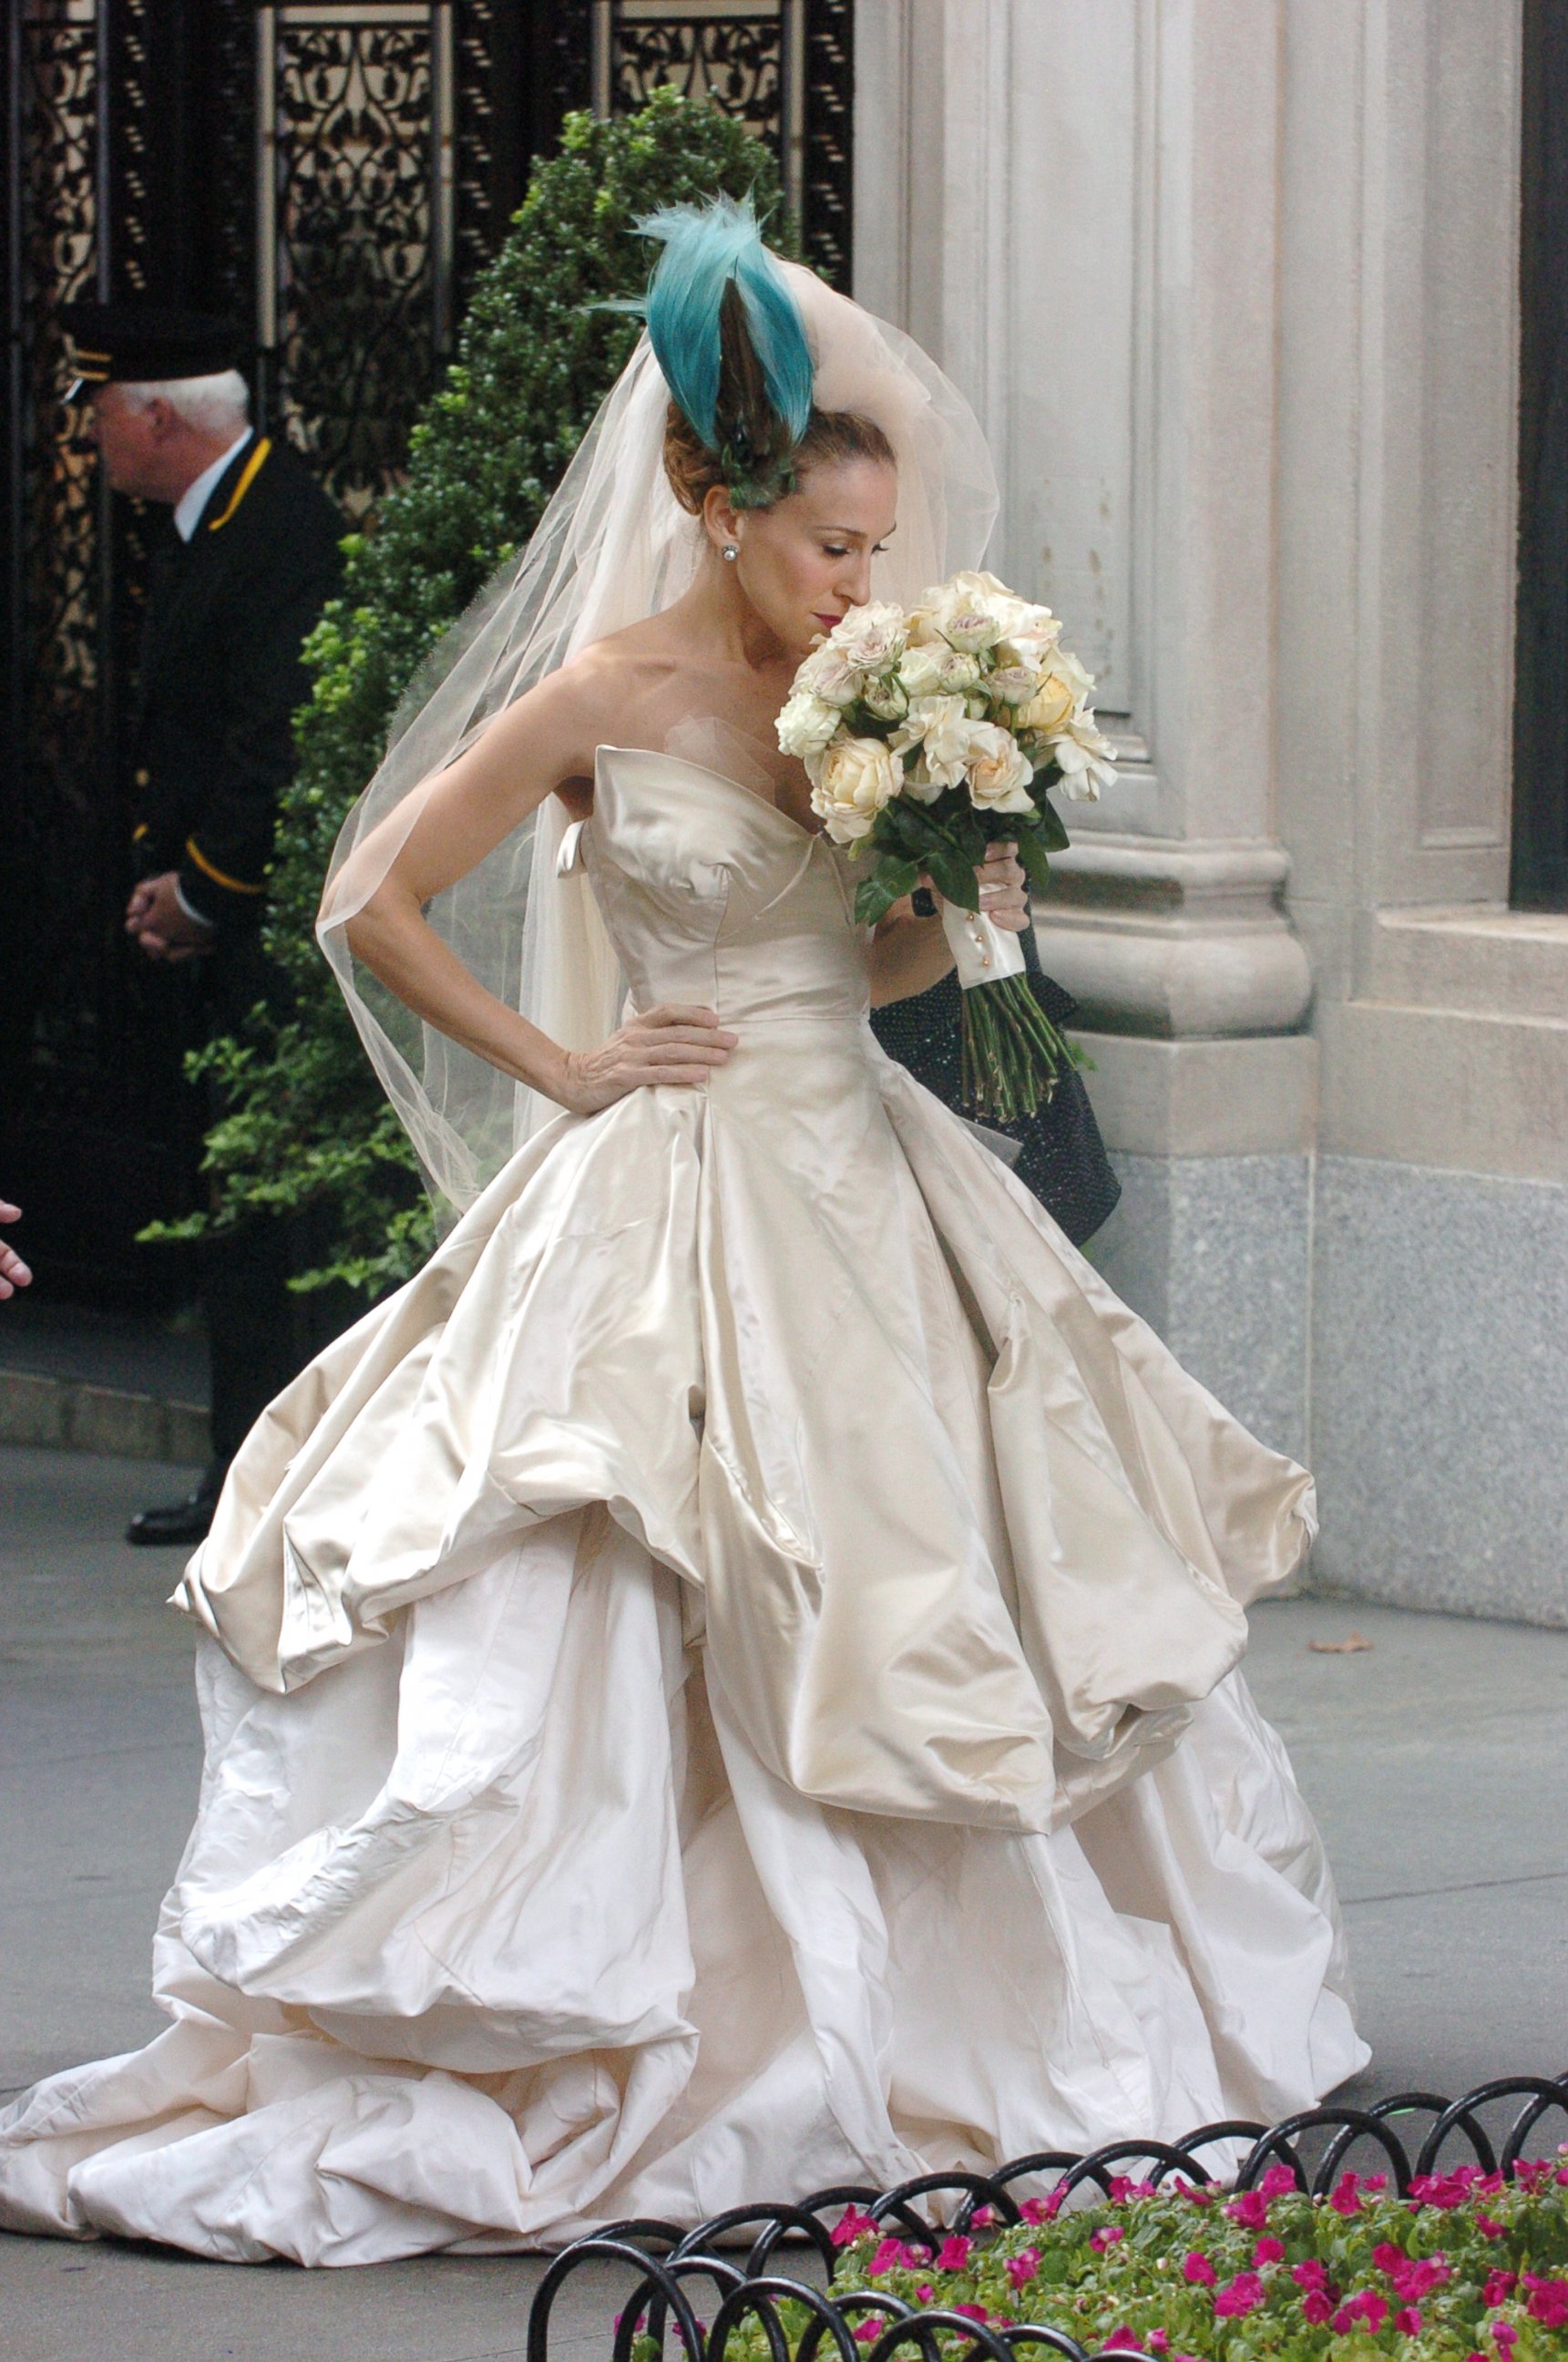 PHOTO: Sarah Jessica Parker in a wedding dress from the film "Sex And The City," on Oct. 2, 2007, in New York City.